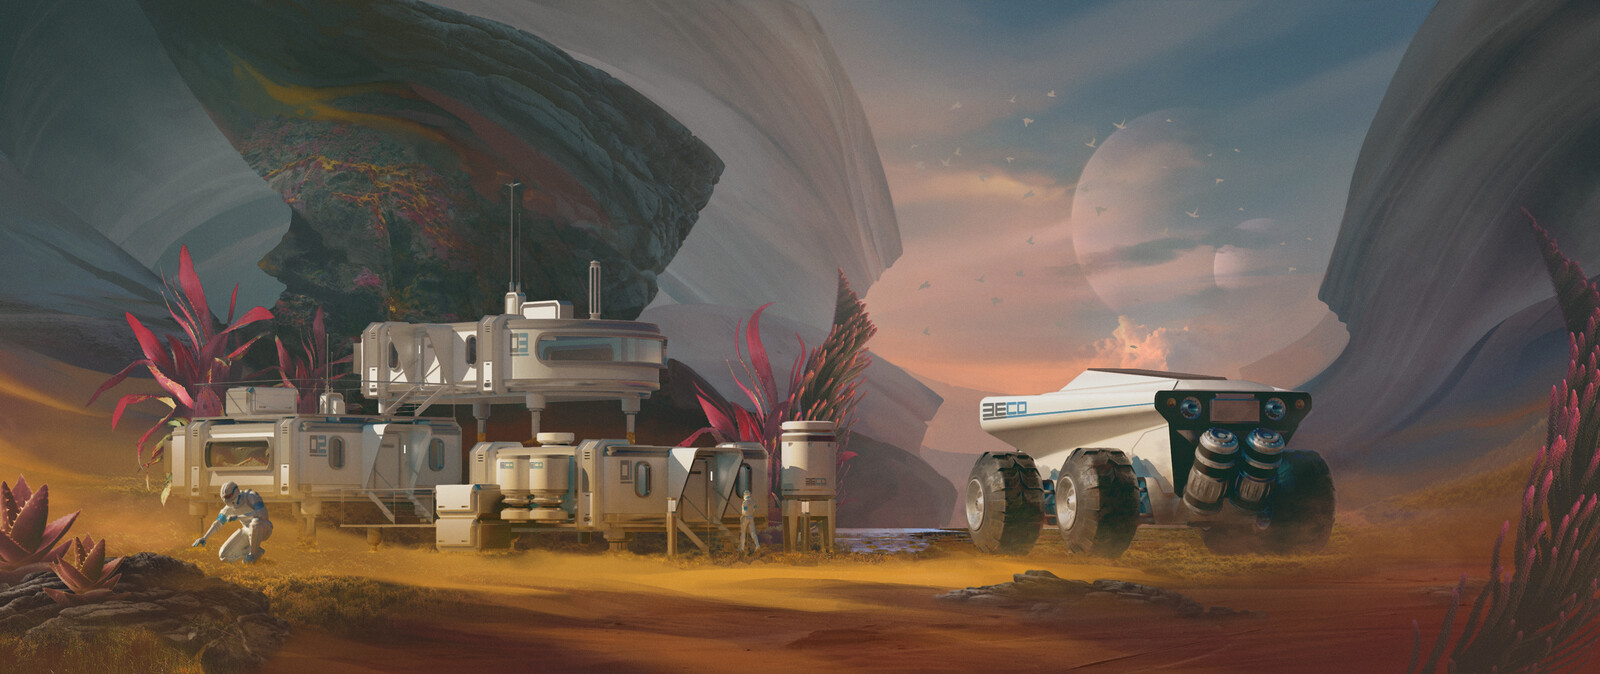 Research outpost